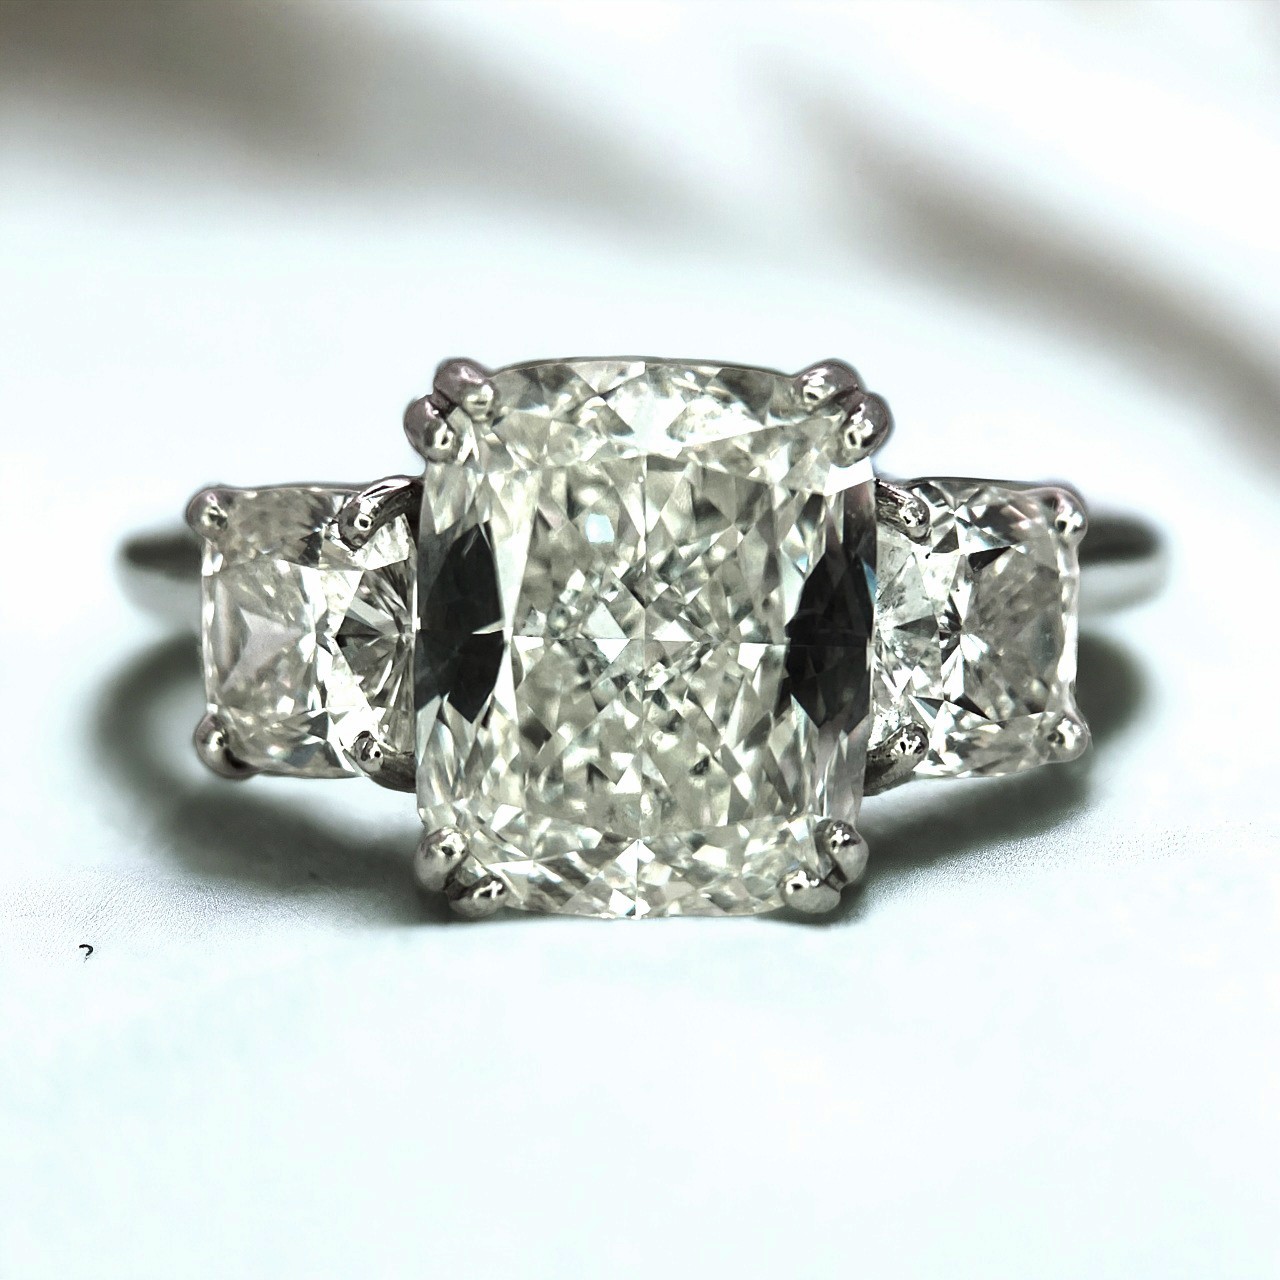 A Breathtaking 4.01ct GIA Certified Diamond Ring. A brilliant cushion cut 4.01ct central diamond - Image 2 of 22